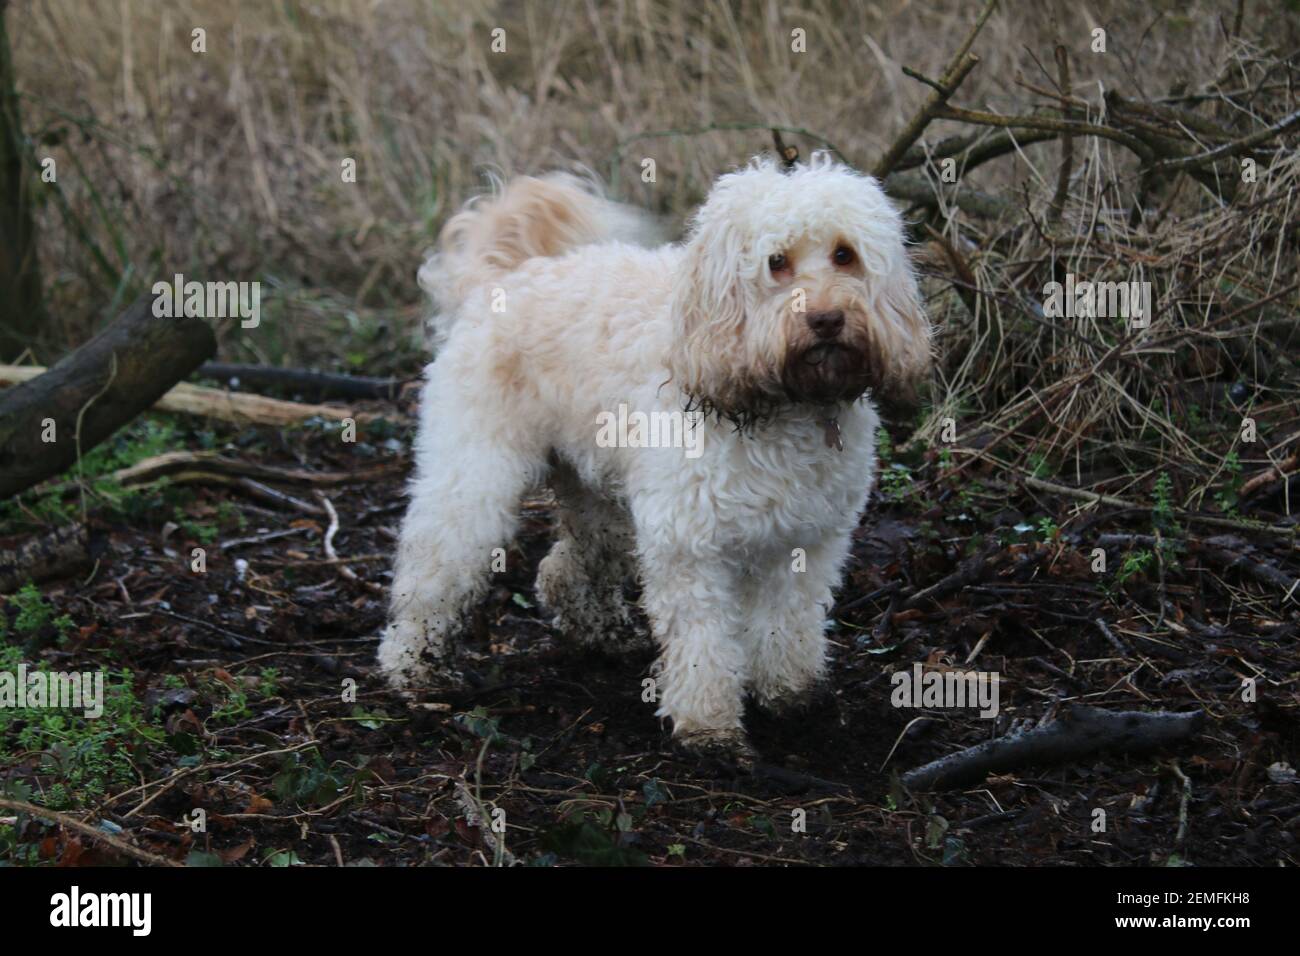 Dog outdoor in landscape, Man's best friend cute terrier small English breed pet muddy golden hair coat standing alert stood in muddy wood land Stock Photo